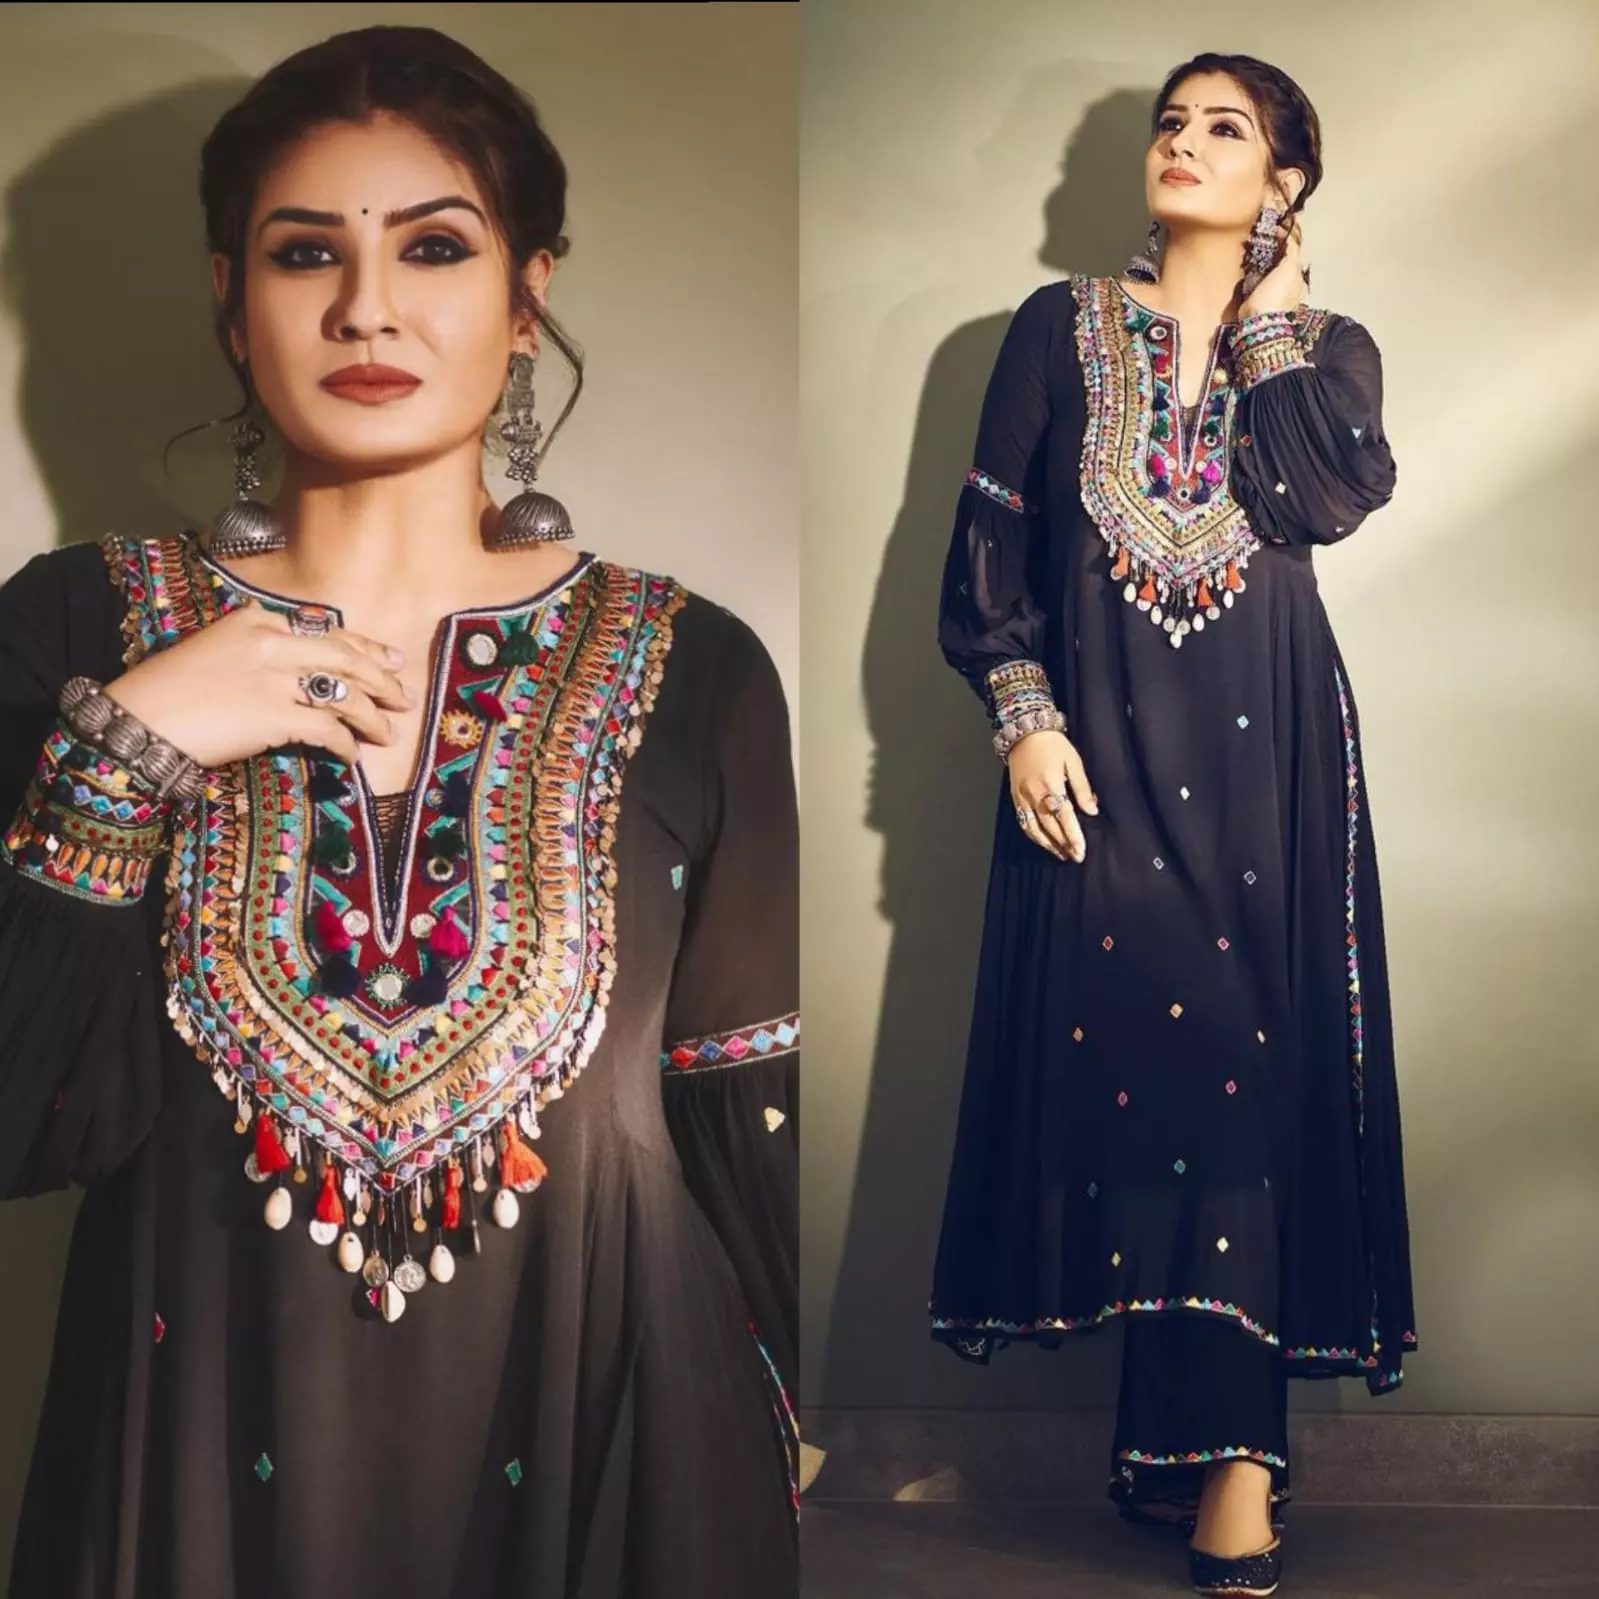 Raveena Tandon redefines the boho-chic style in a Rs 36k  outfit